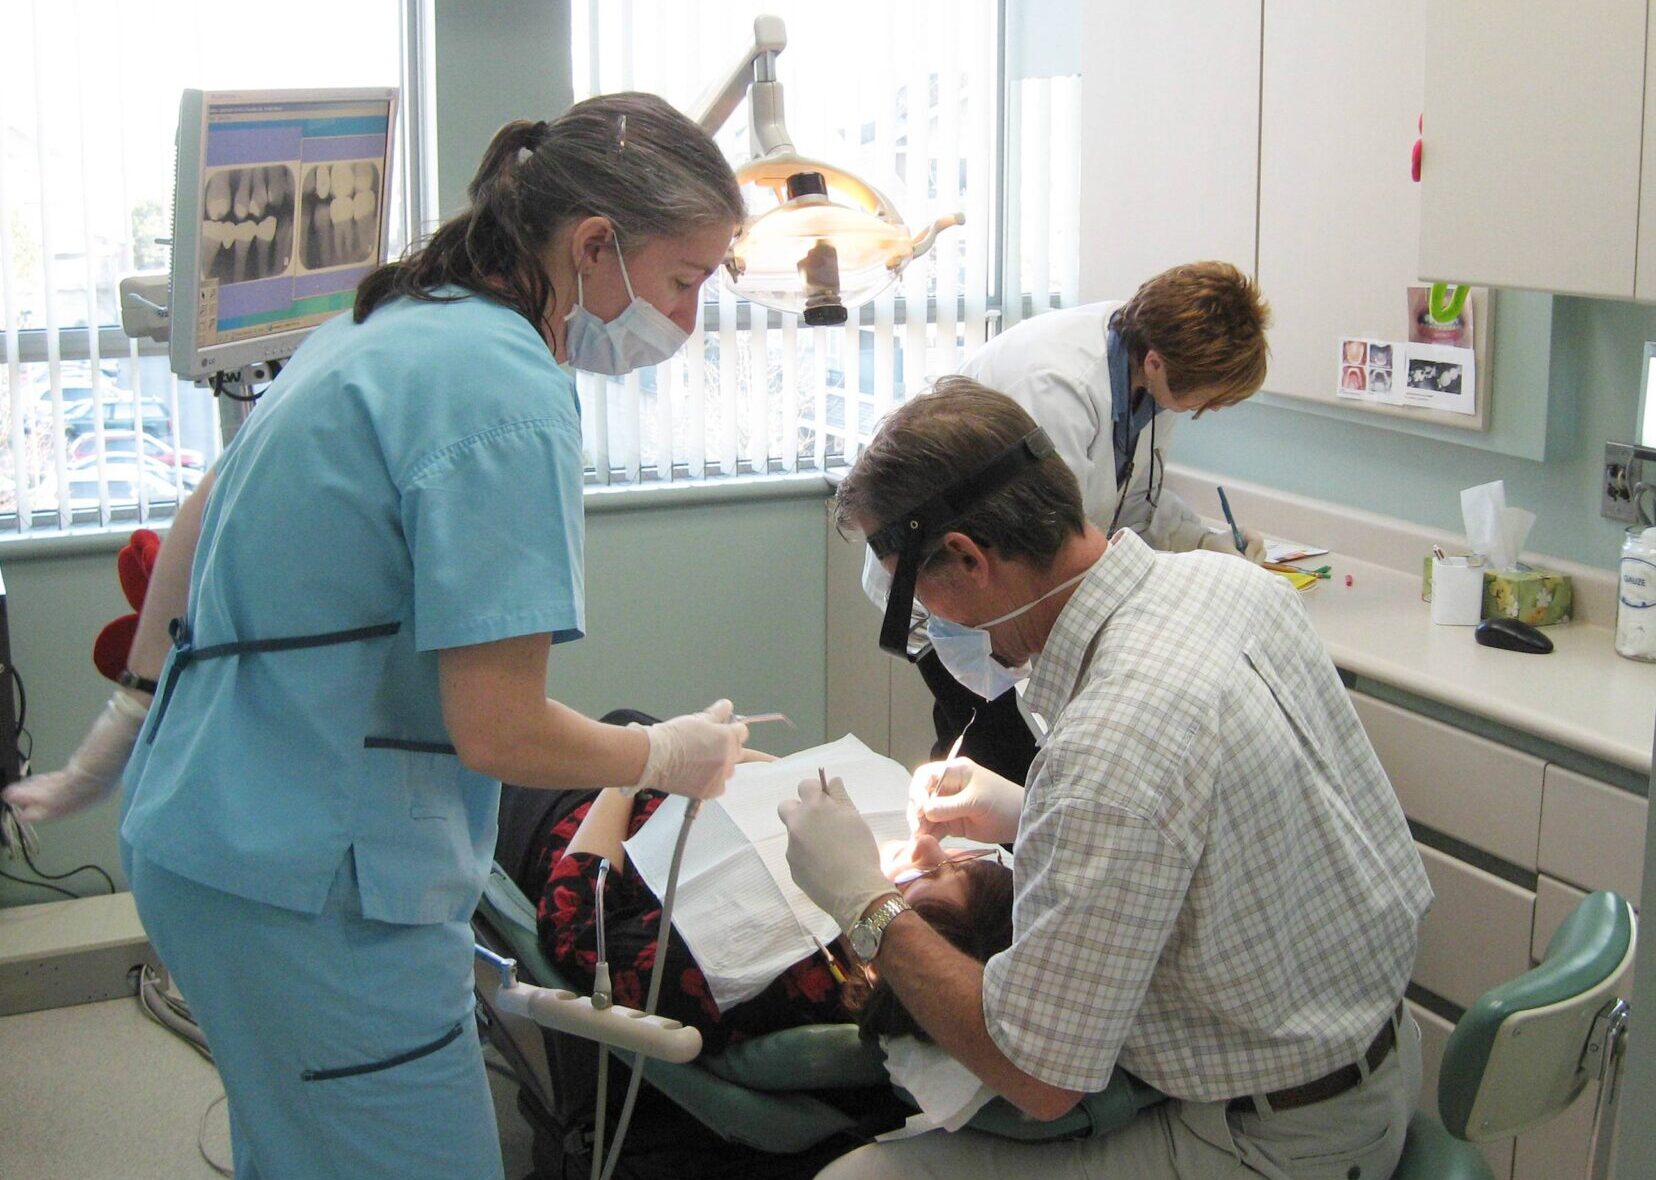 Dental Practice Treatment Room with patient - Patient facilitation and dental team training